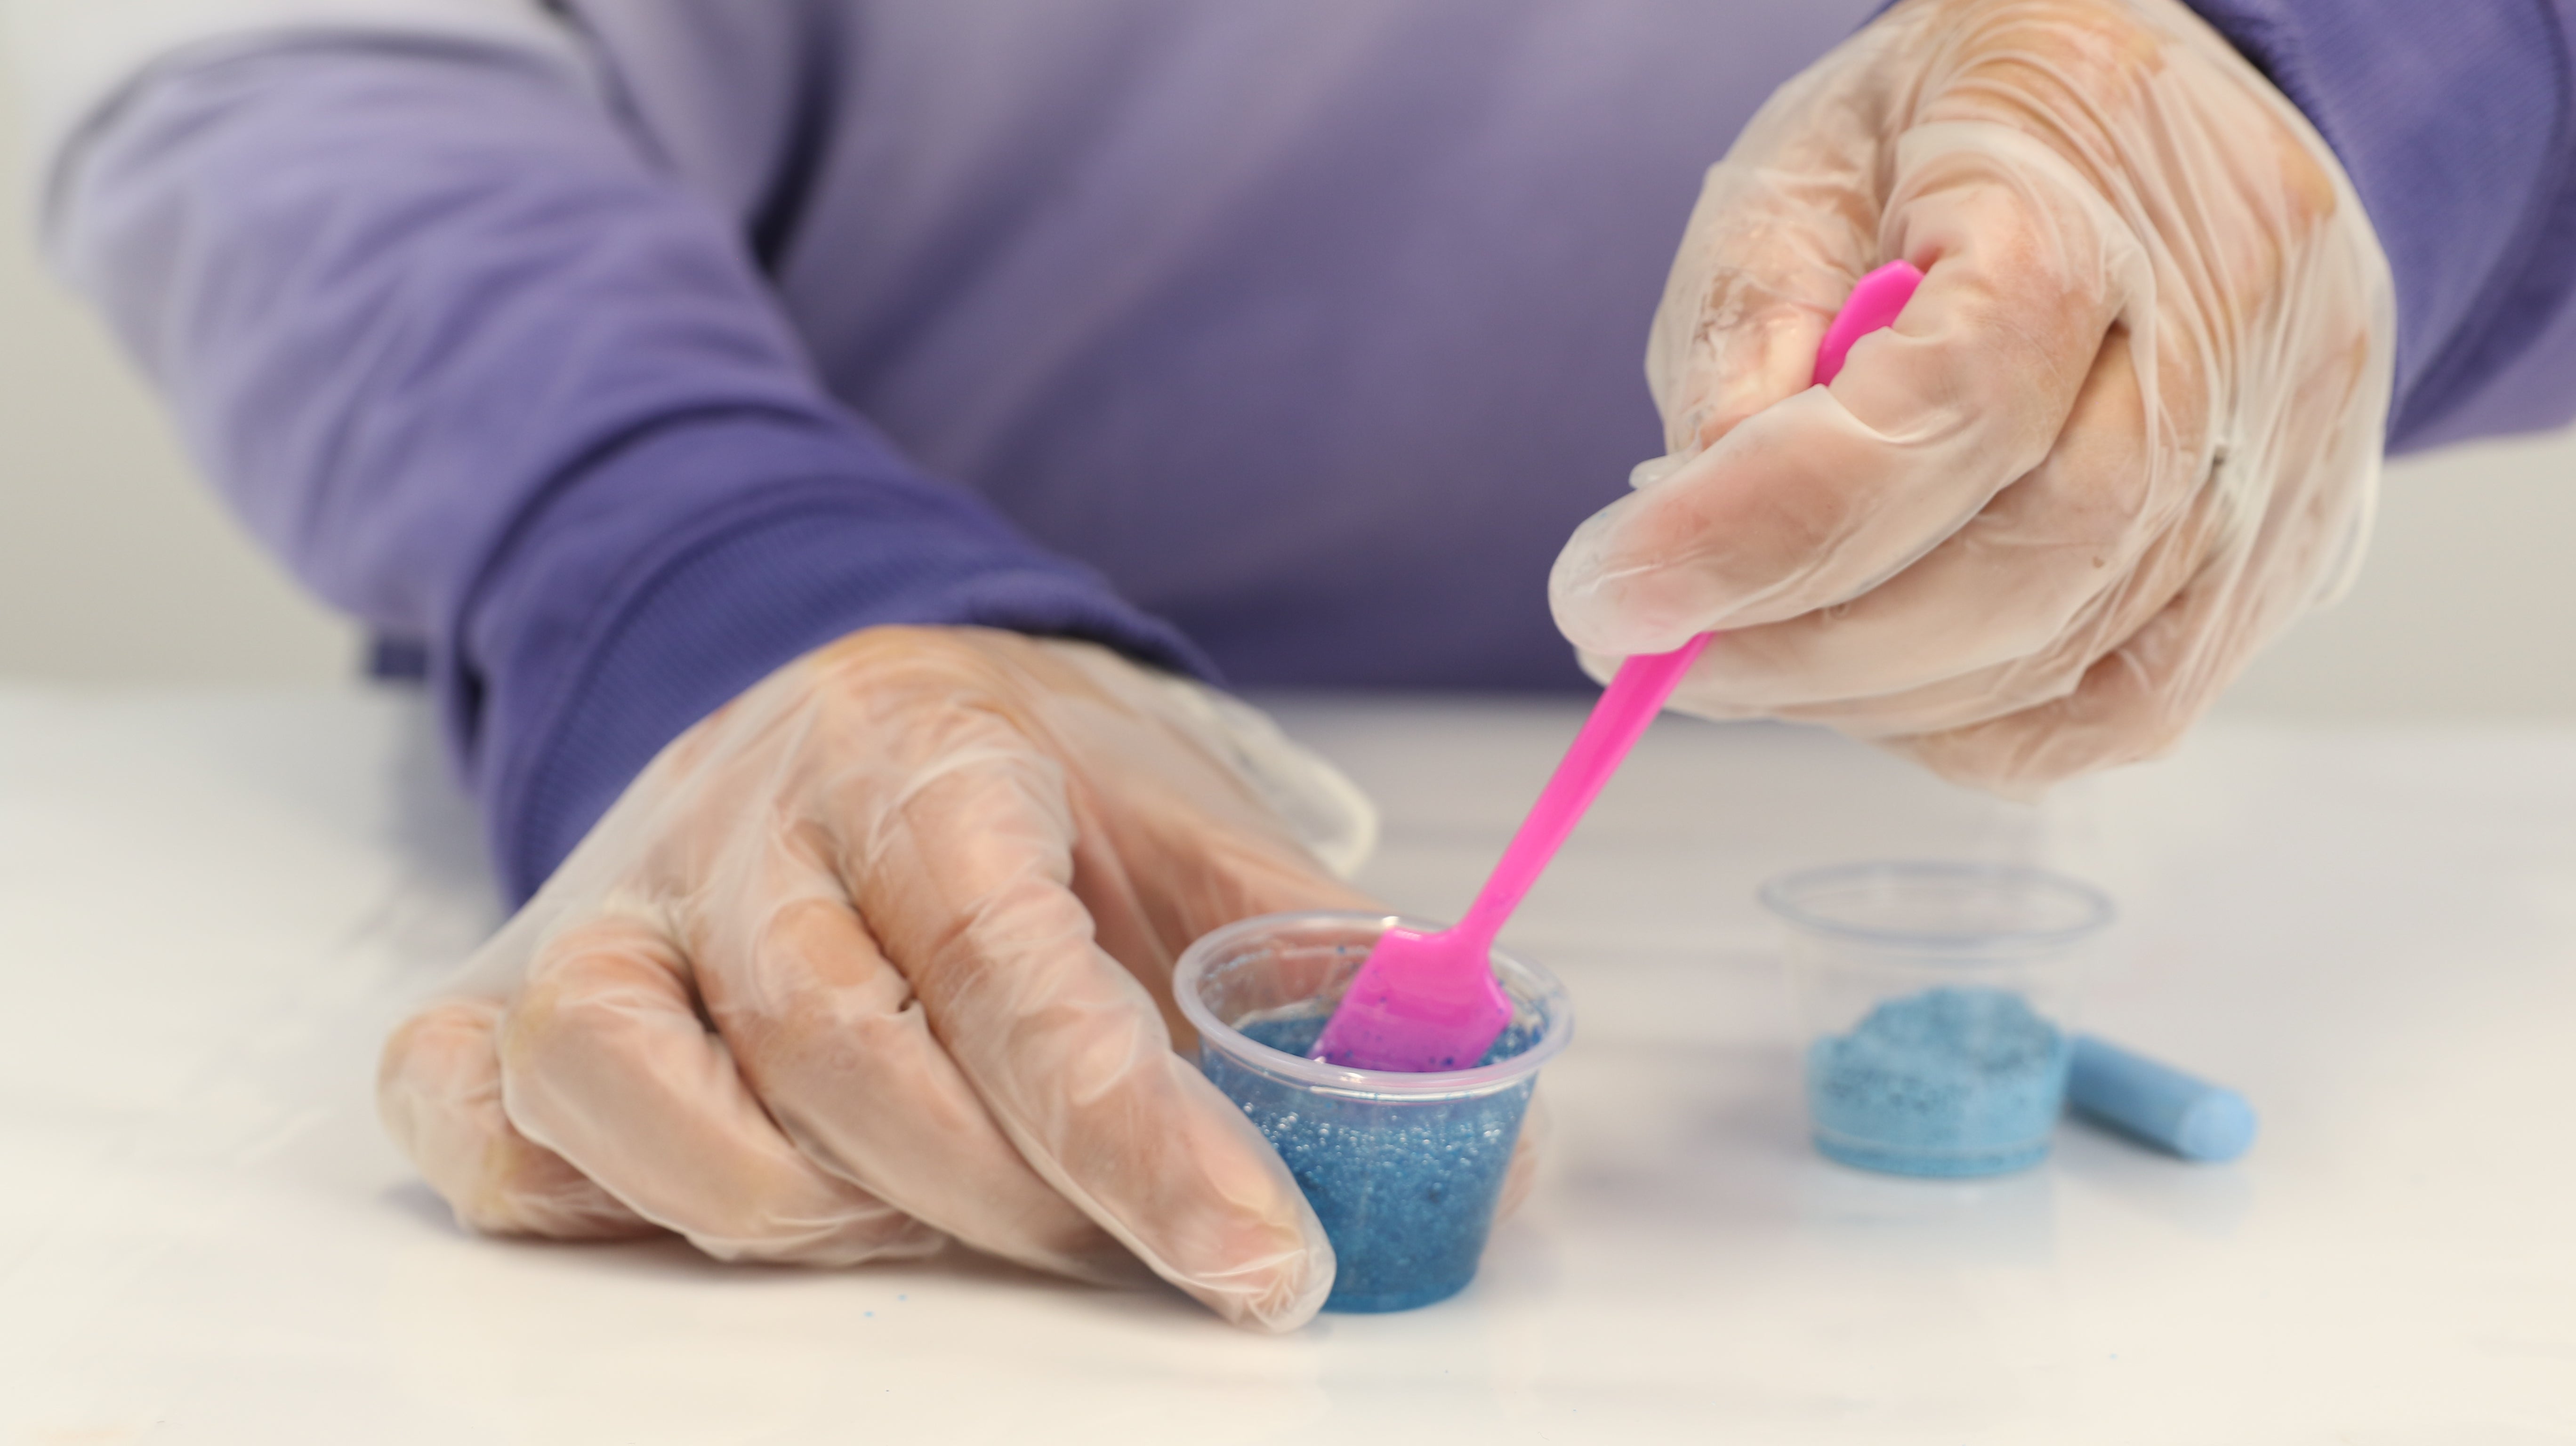 how to color clear epoxy resin - chalk is too coarse and will not dissolve well in resin